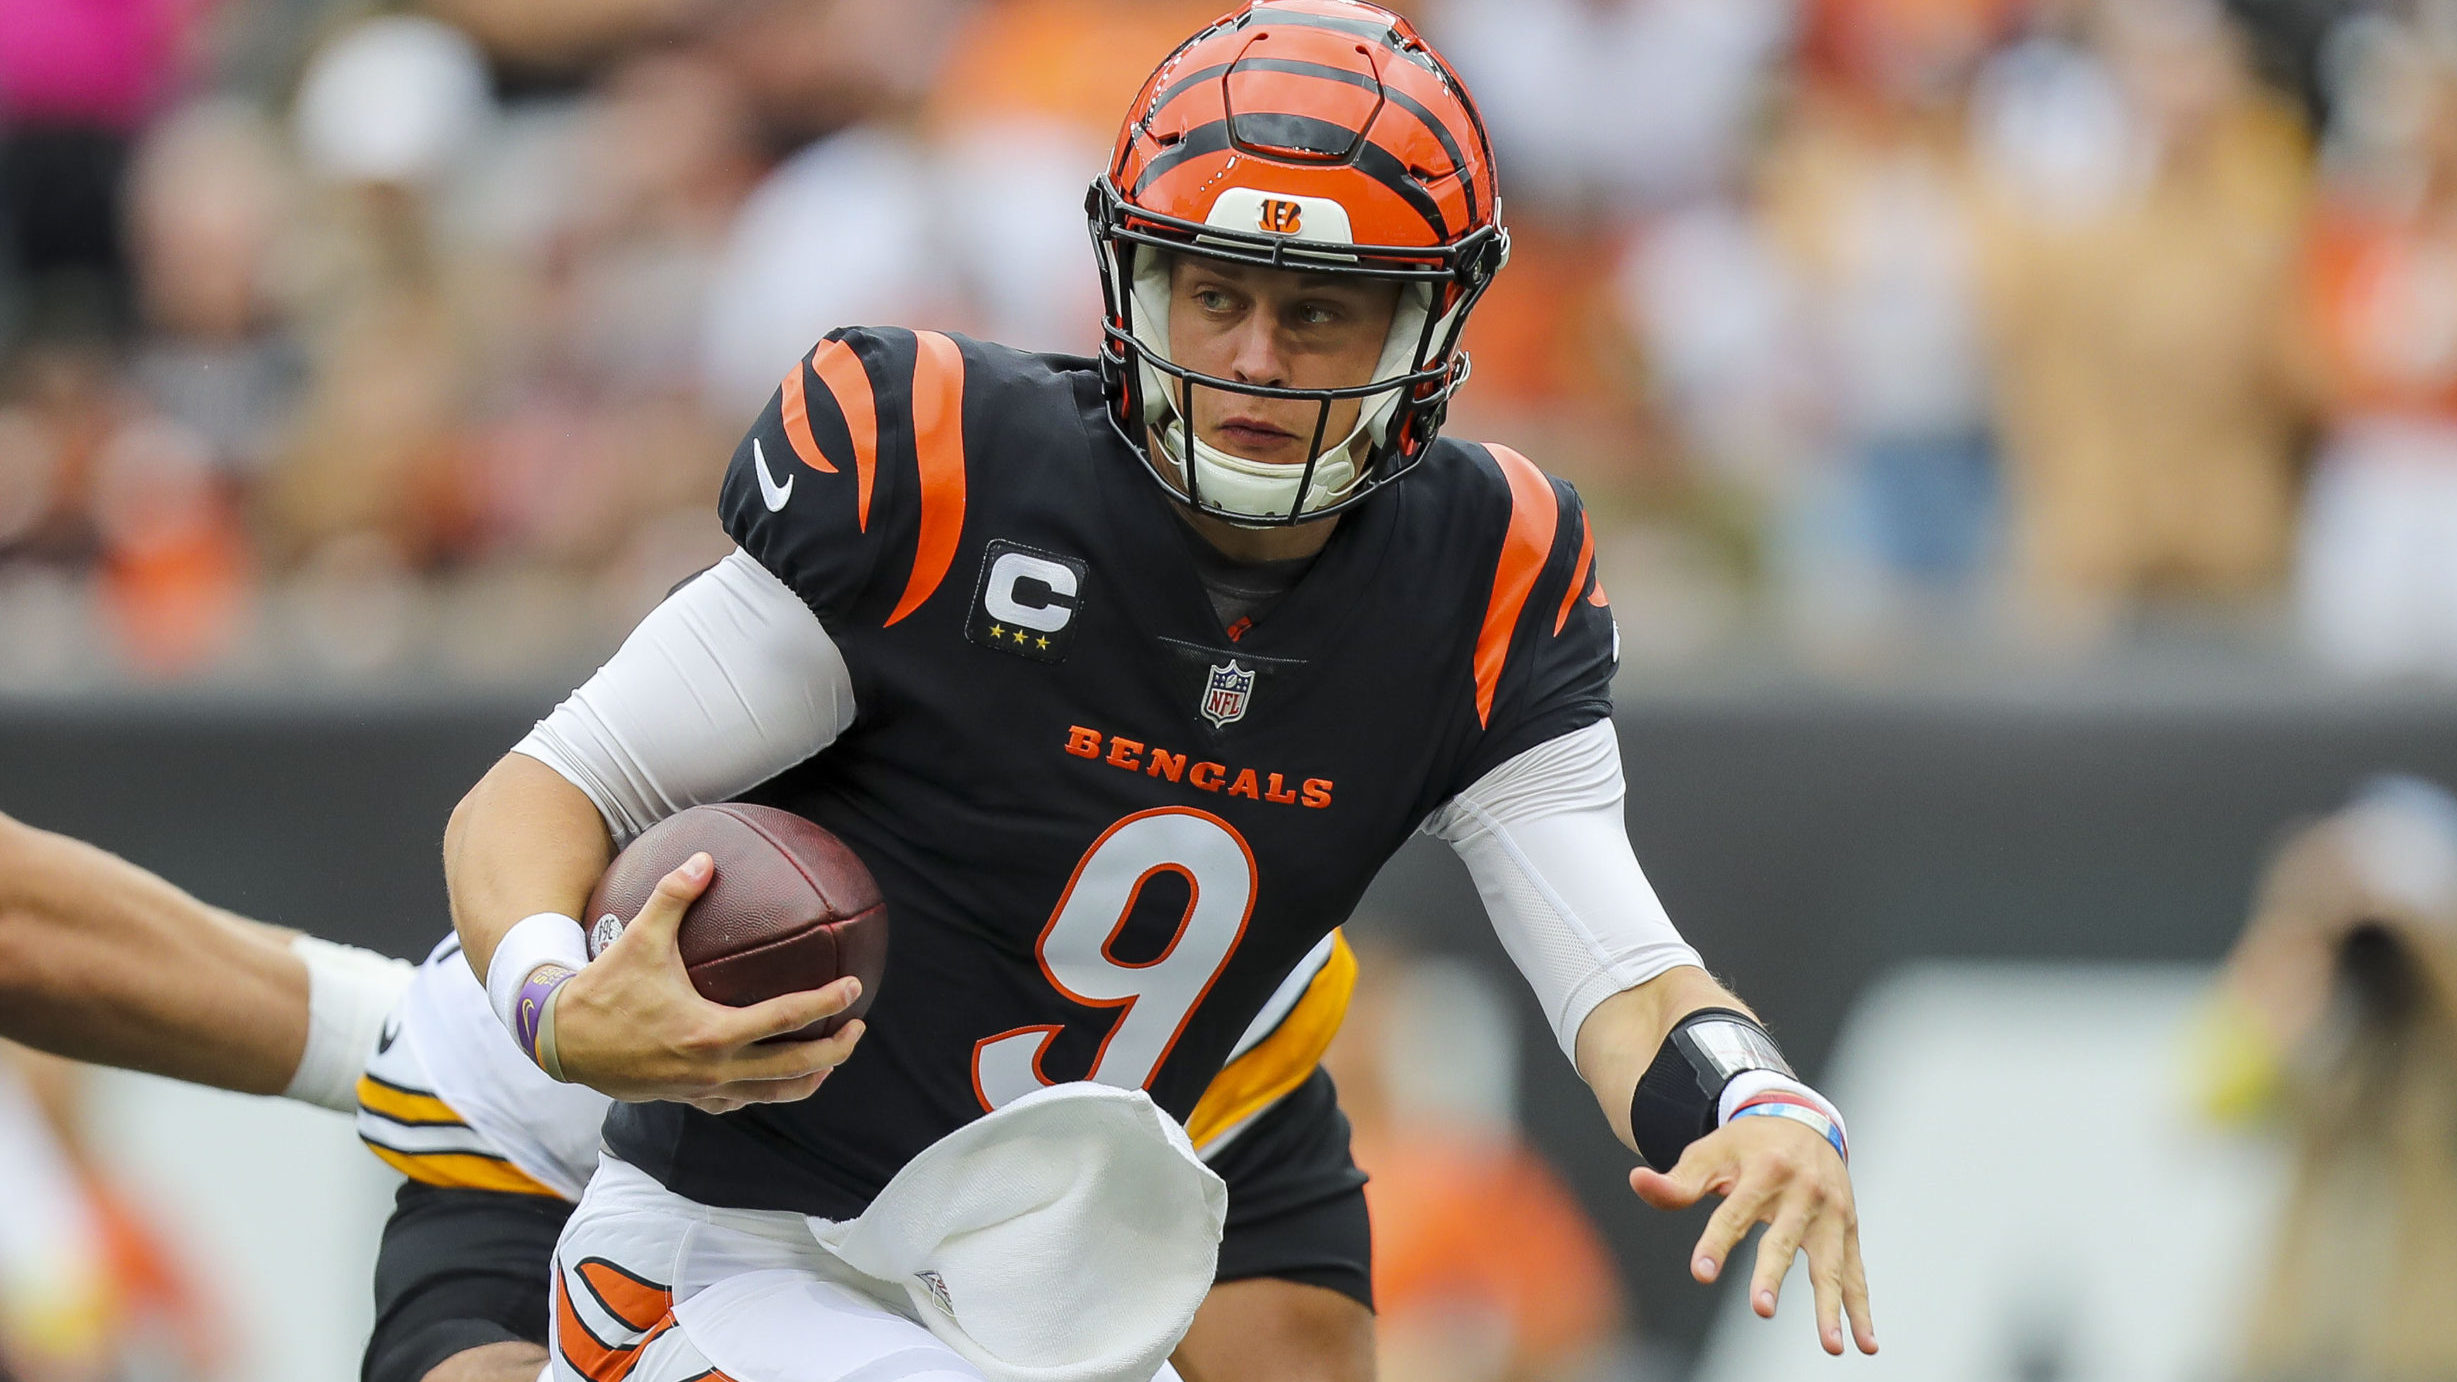 Bengals Struggle to Protect Burrow in OT Loss to Steelers